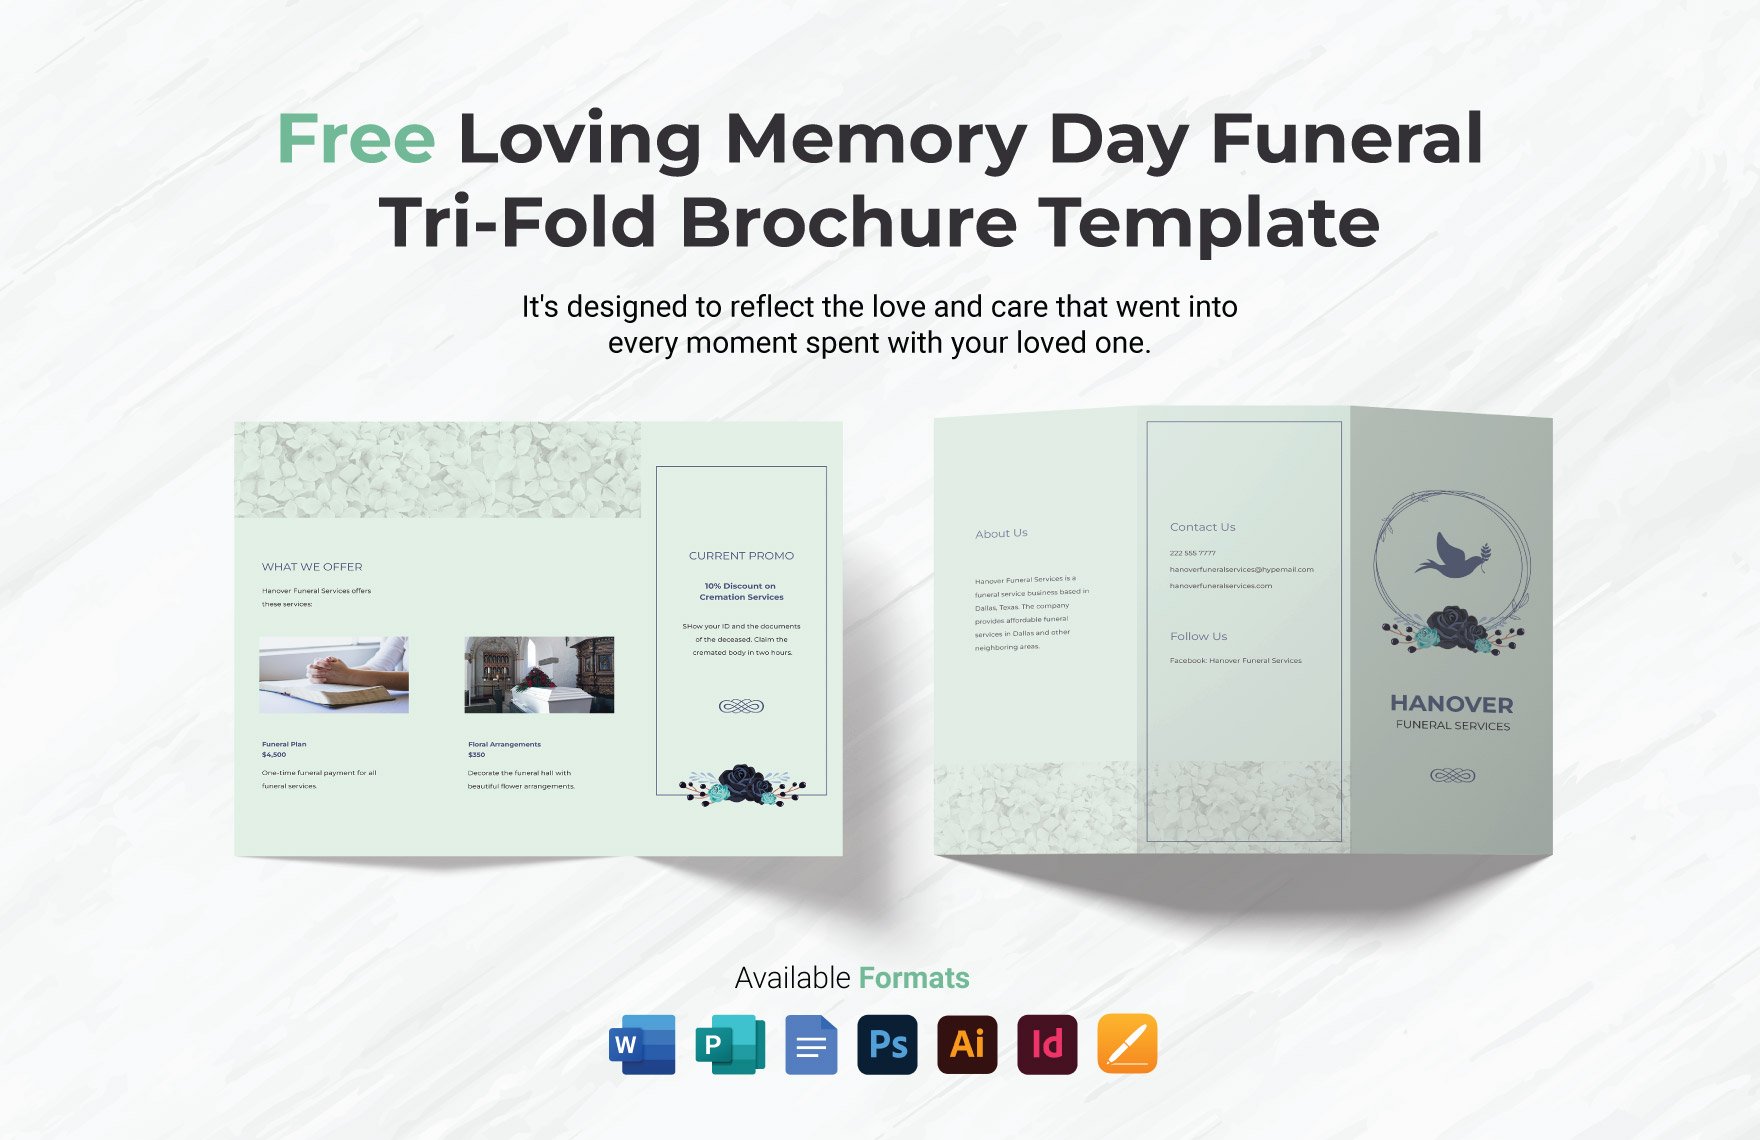 Loving Memory Day Funeral Tri-Fold Brochure Template in Word, Google Docs, Illustrator, PSD, Apple Pages, Publisher, InDesign